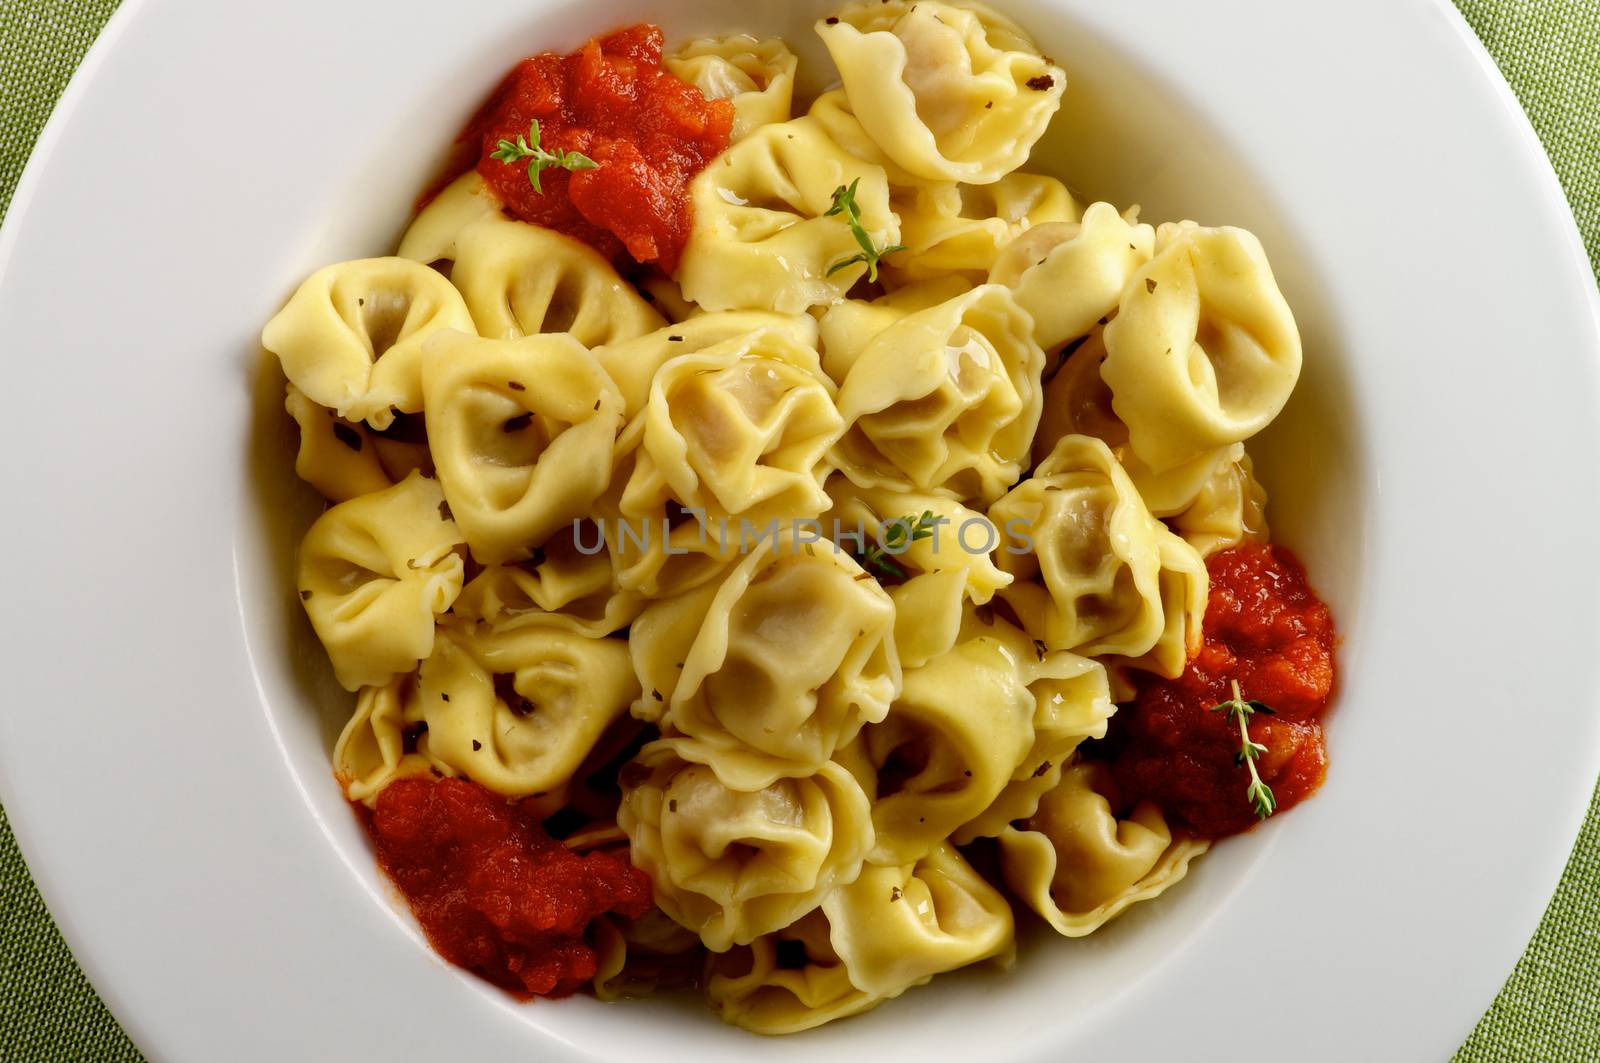 Delicious Meat Cappelletti in with Tomatoes Sauce in White Plate closeup on Green Napkin background